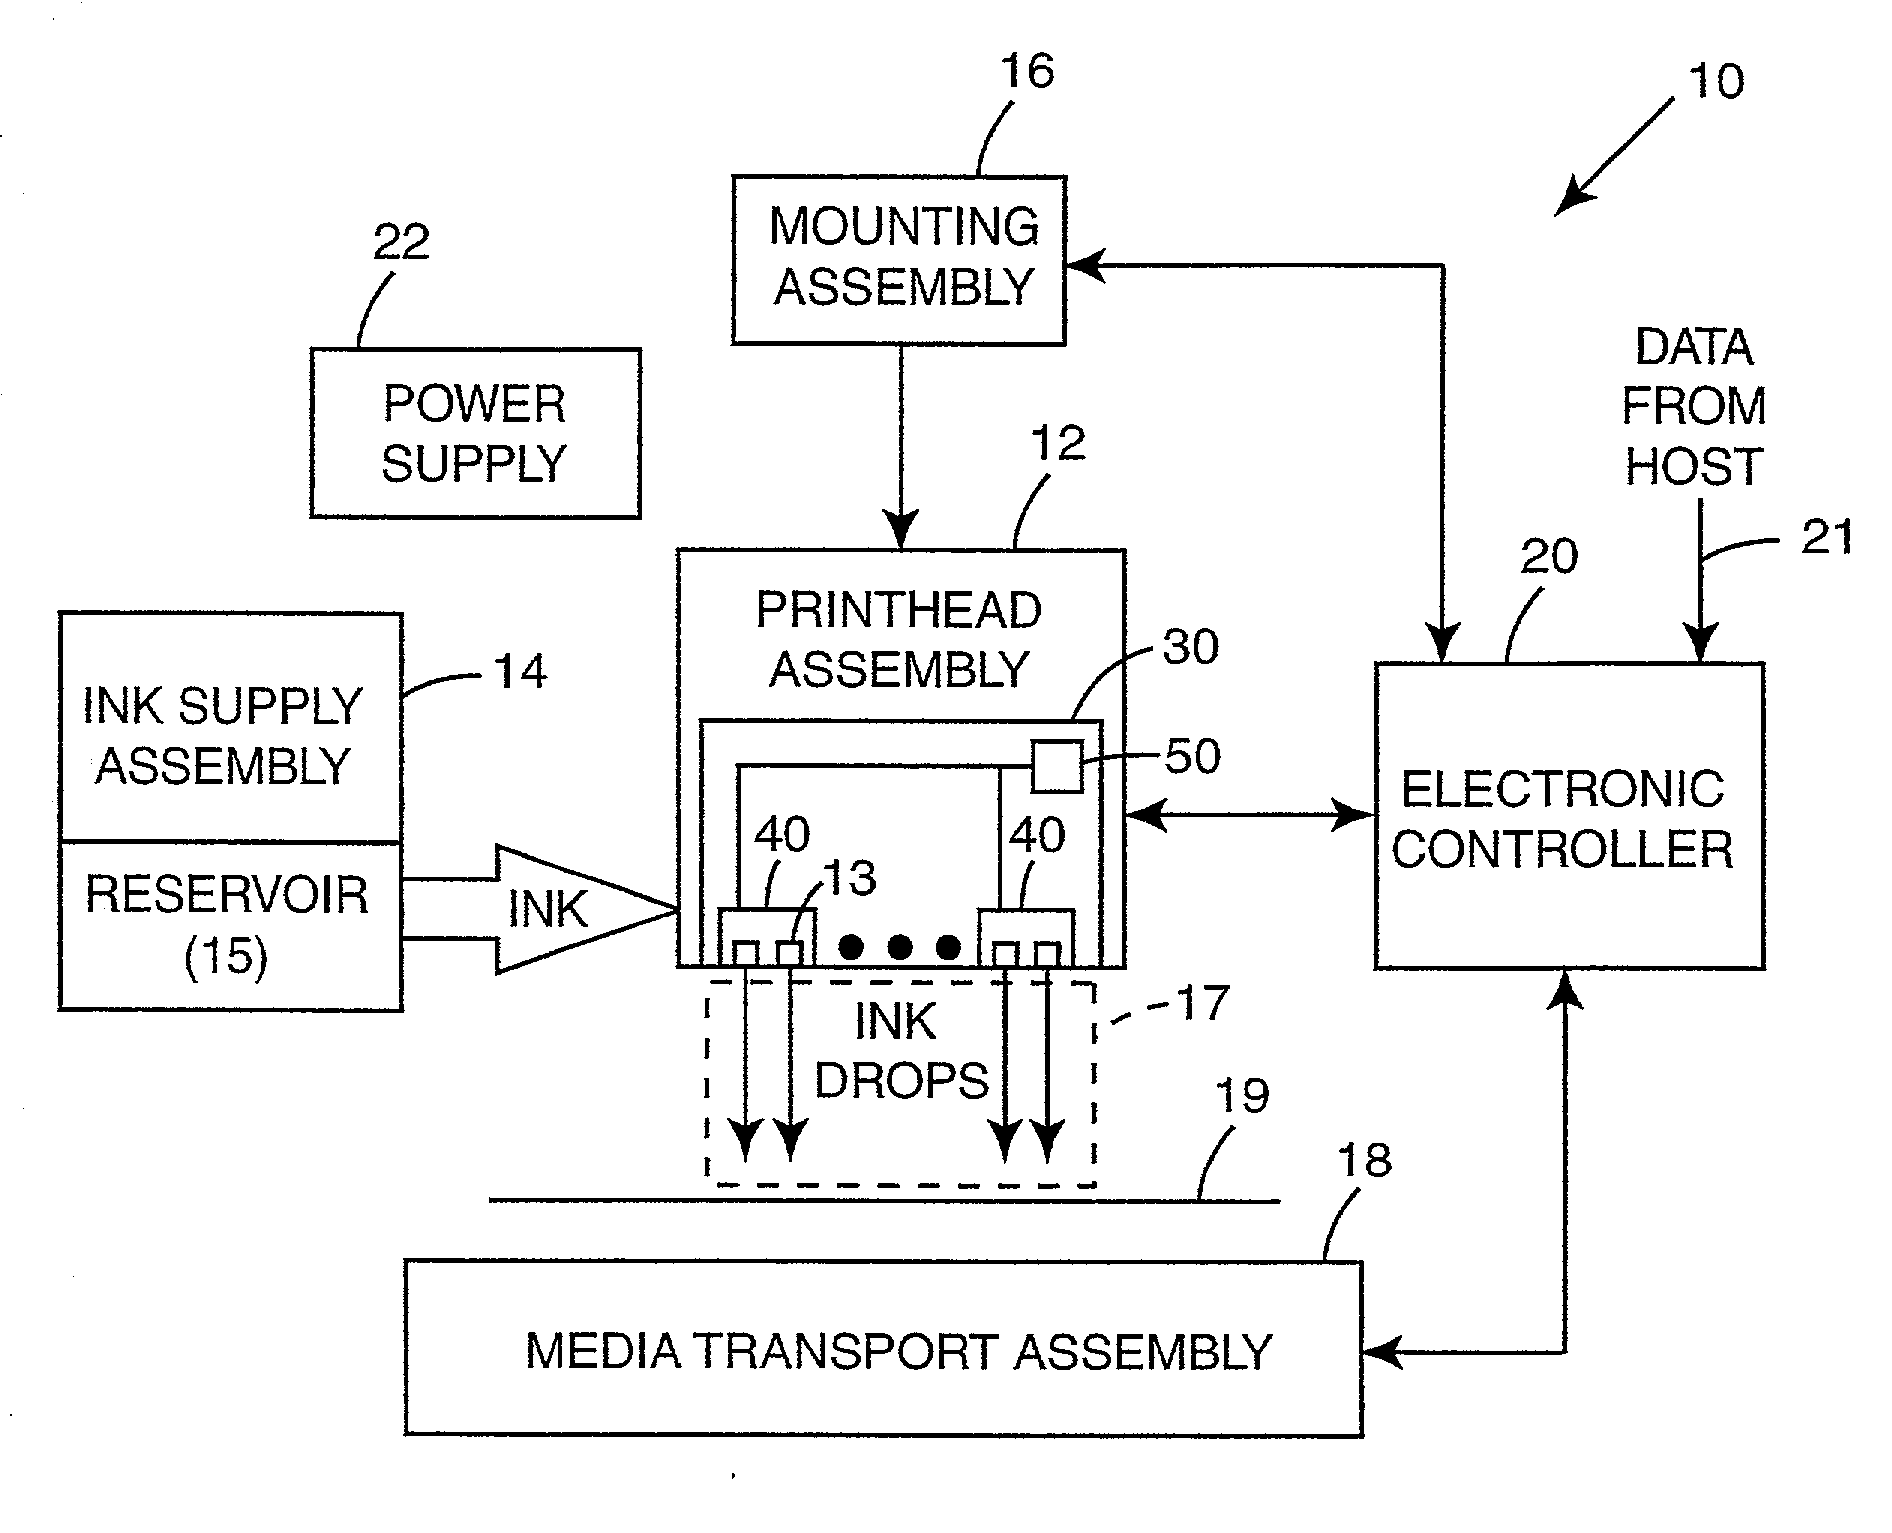 Low voltage differential signaling for communicating with inkjet printhead assembly